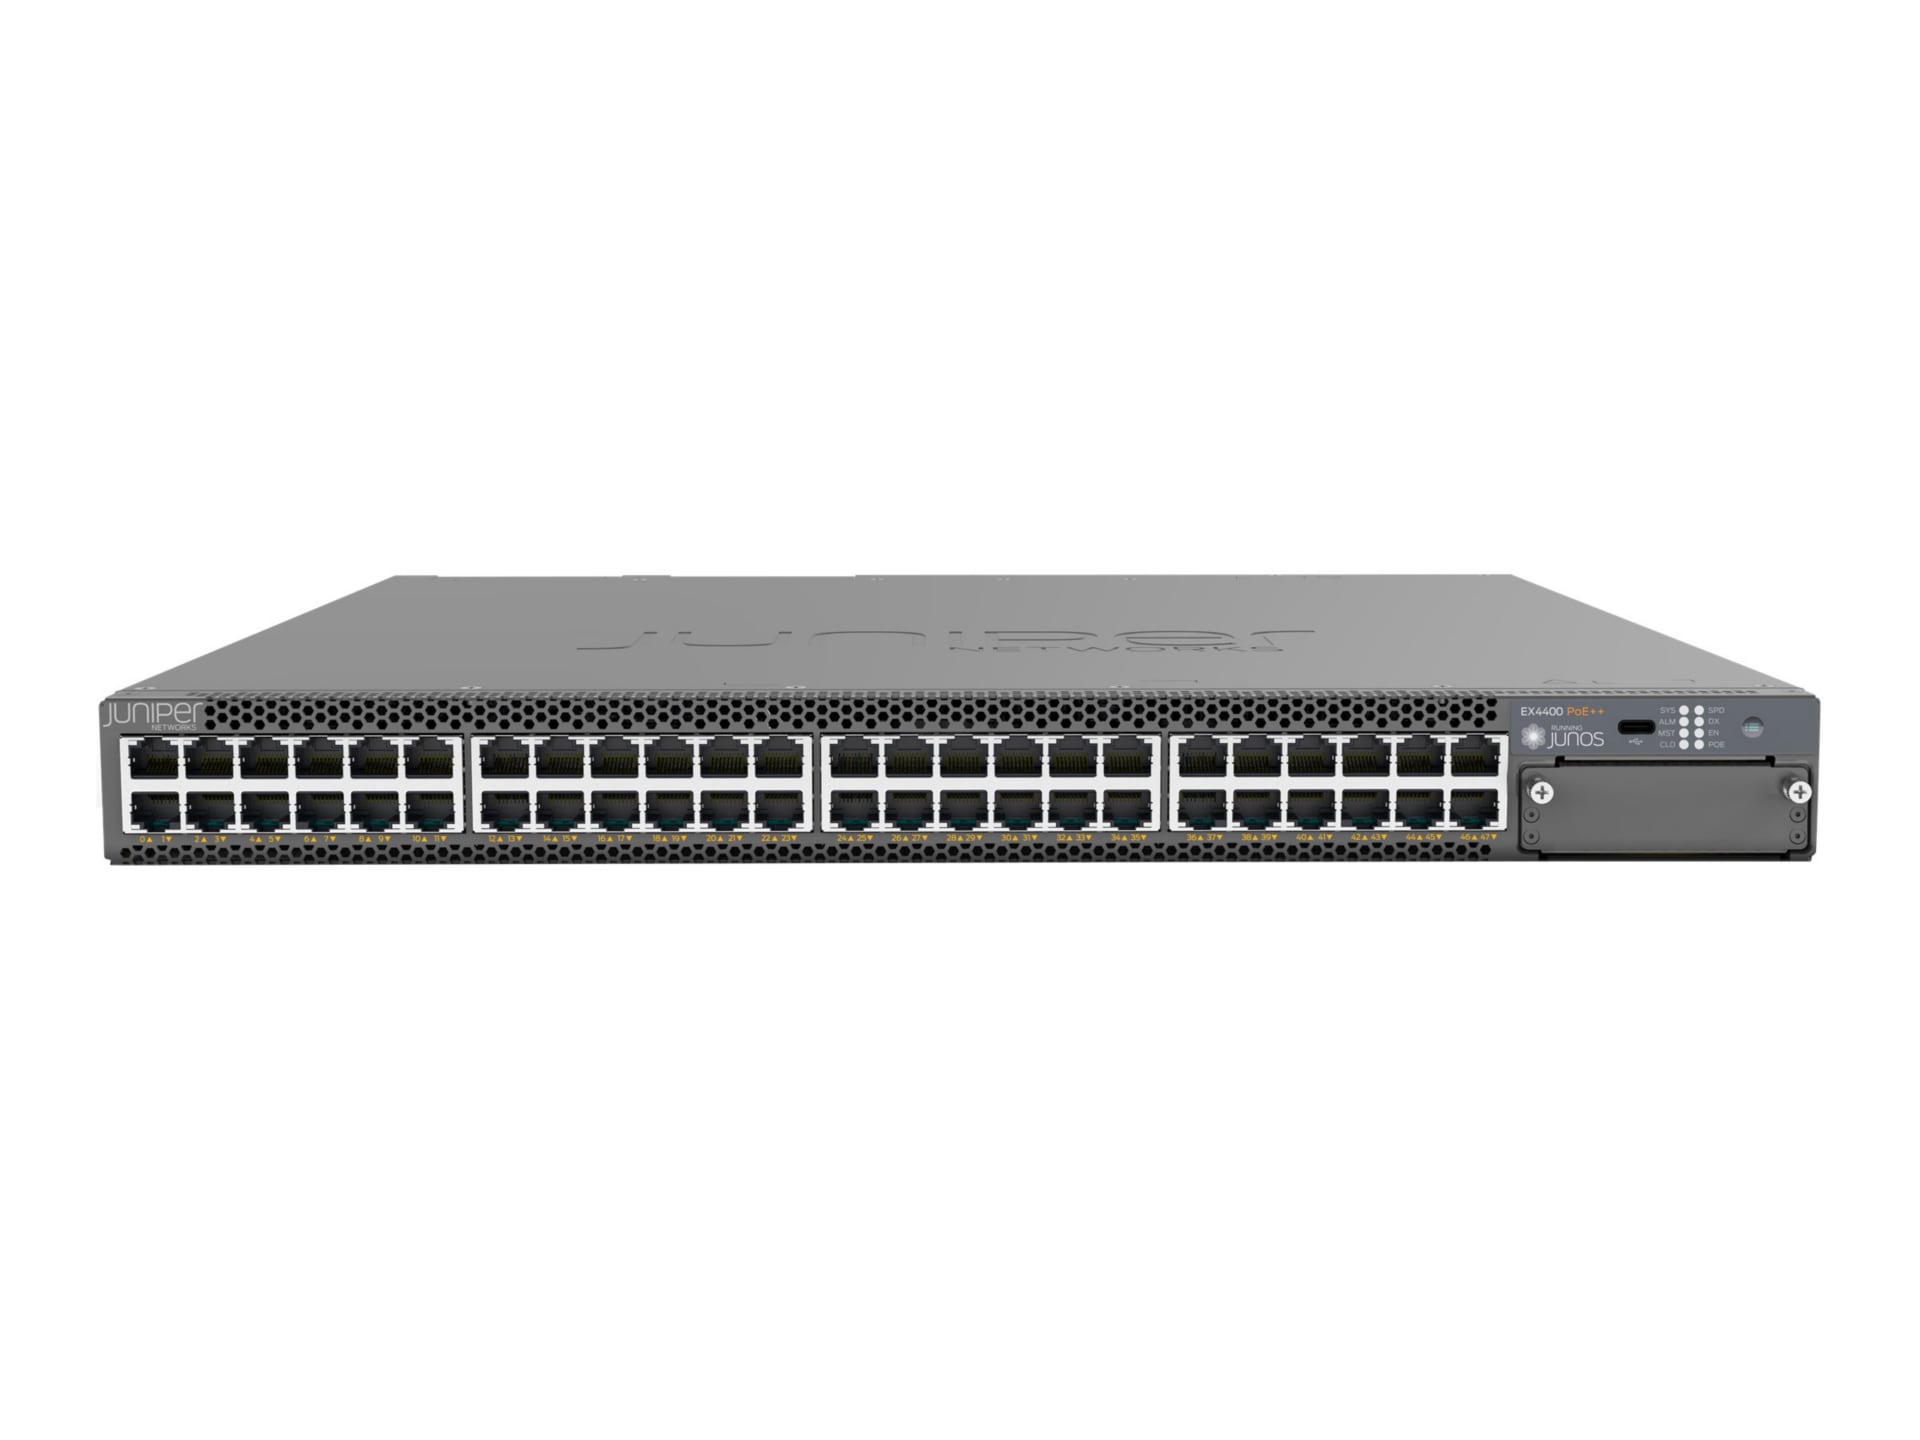 Juniper Networks EX Series EX4400-48P - switch - 48 ports - managed - rack-mountable - E-Rate program